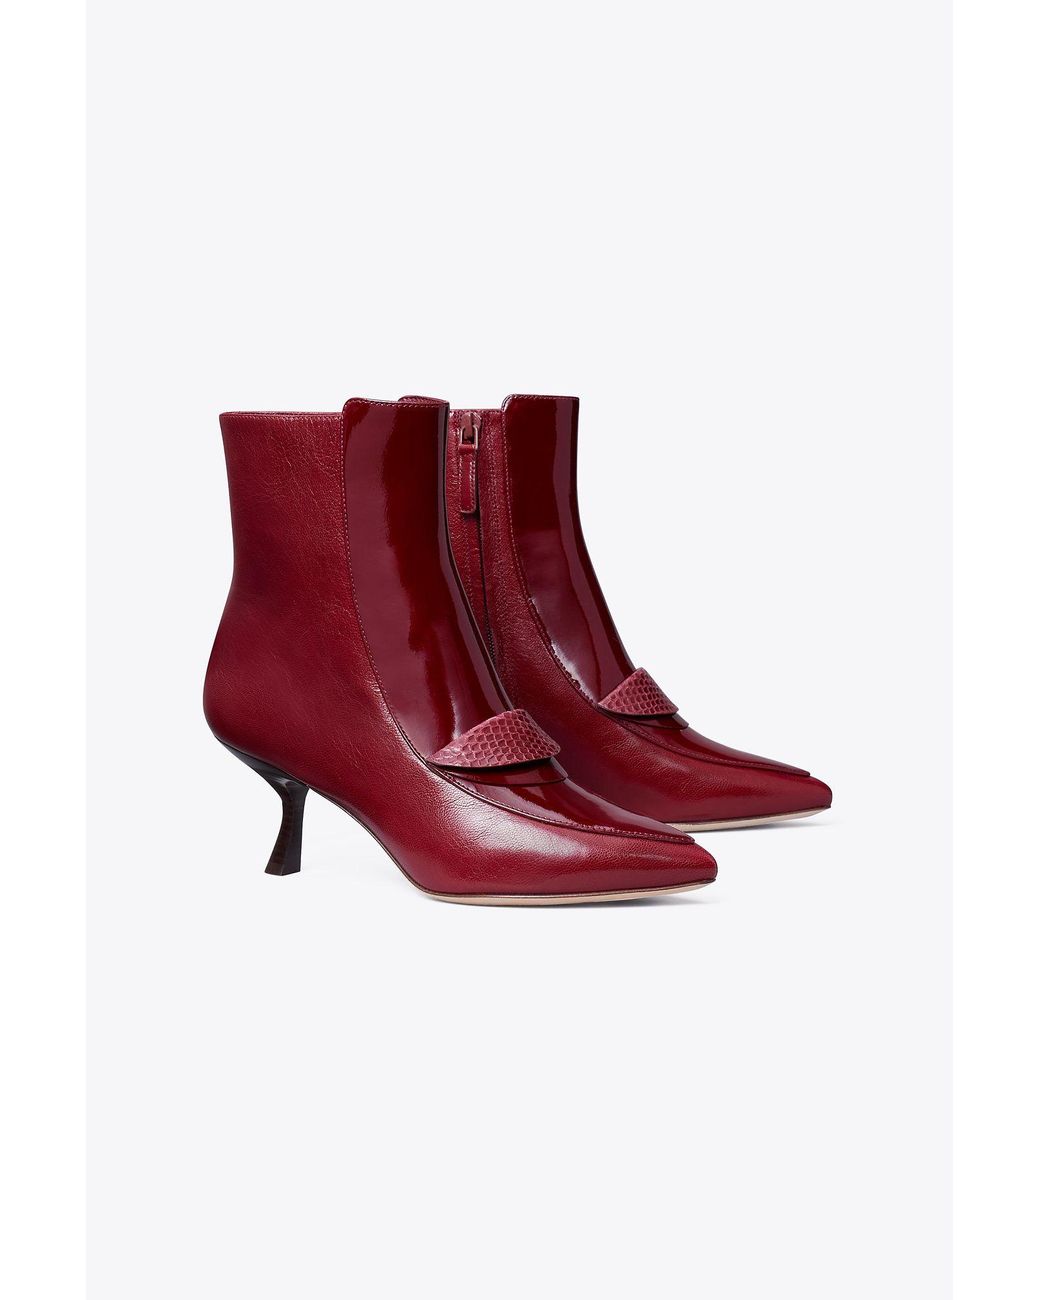 Tory Burch Envelope Ankle Boot in Red | Lyst